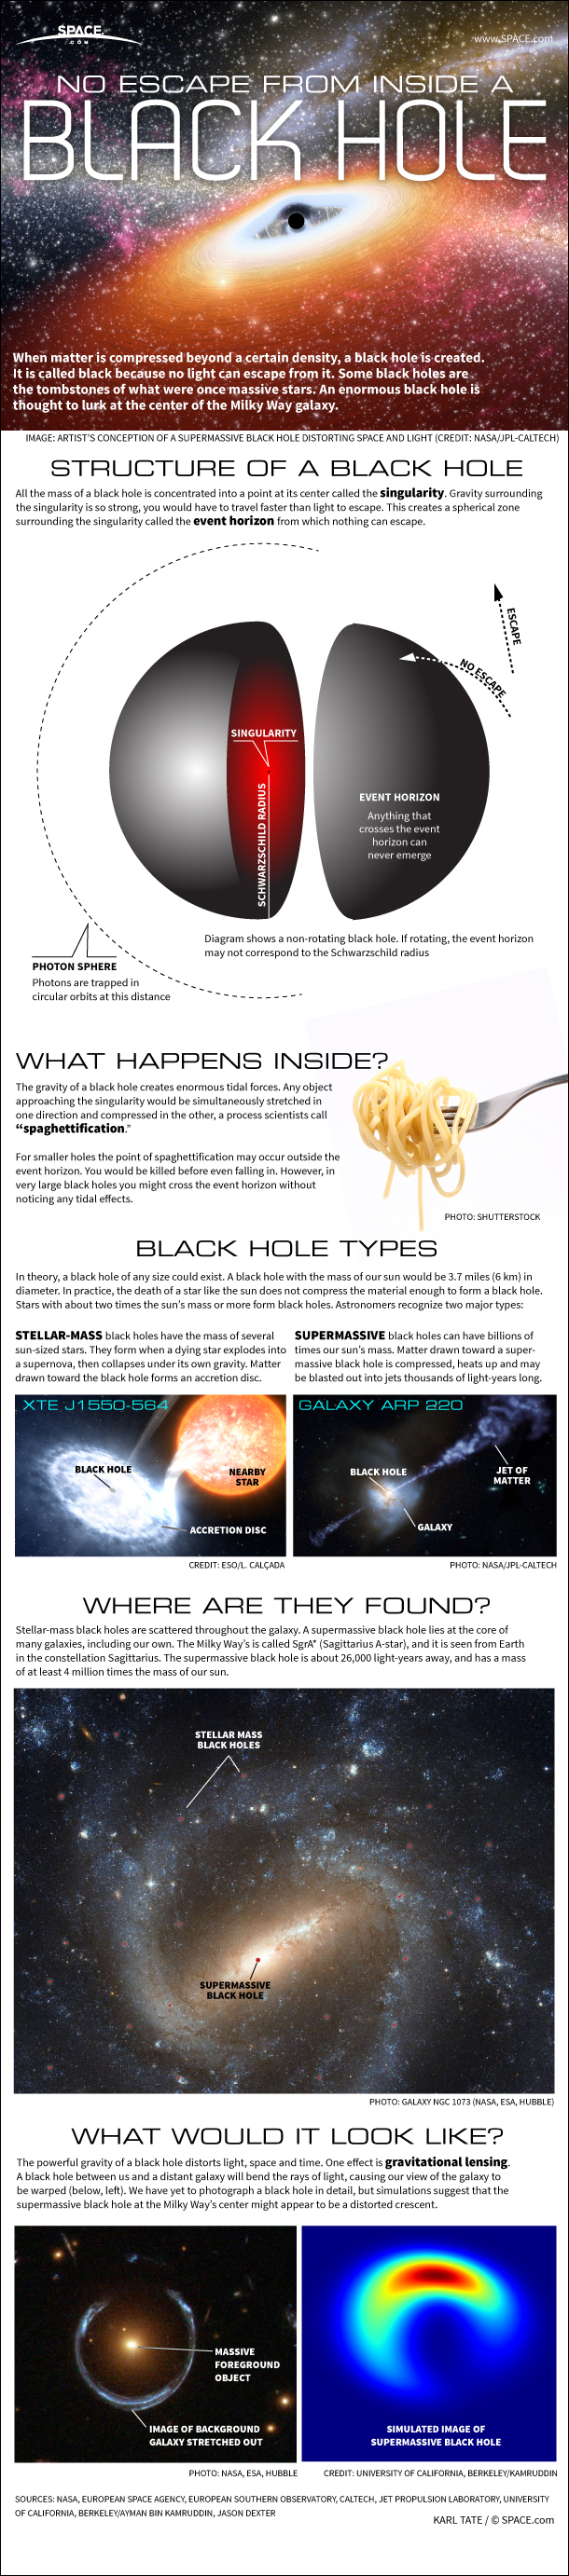 Black holes are strange regions where gravity is strong enough to bend light, warp space and distort time. [<a href=http://www.space.com/19339-black-holes-facts-explained-infographic.html>See how black holes work in this SPACE.com infographic</a>.]